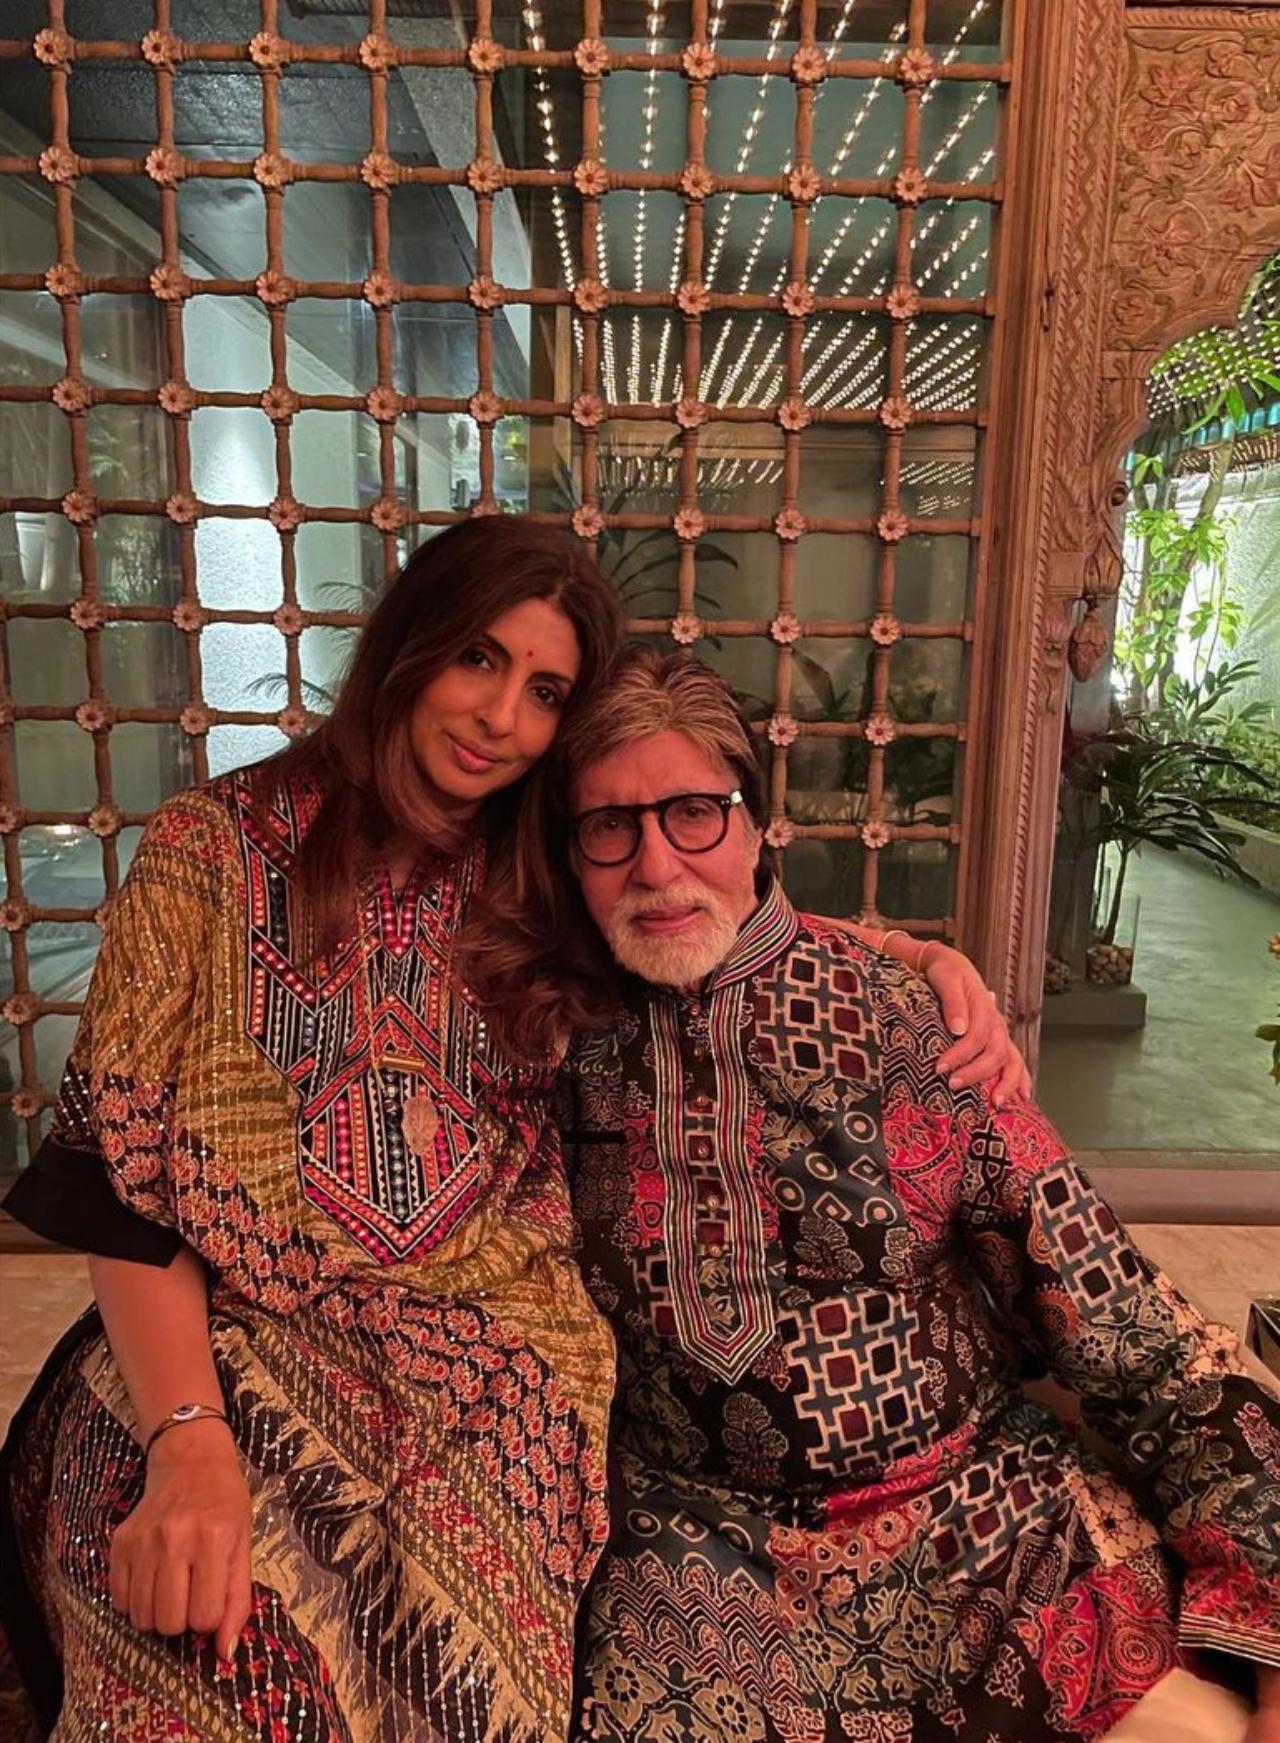 Shweta Bachchan took to his Instagram handle to share pictures from their quiet birthday celebrations at home. She also shared a picture of her and Abhishek posing with Amitabh